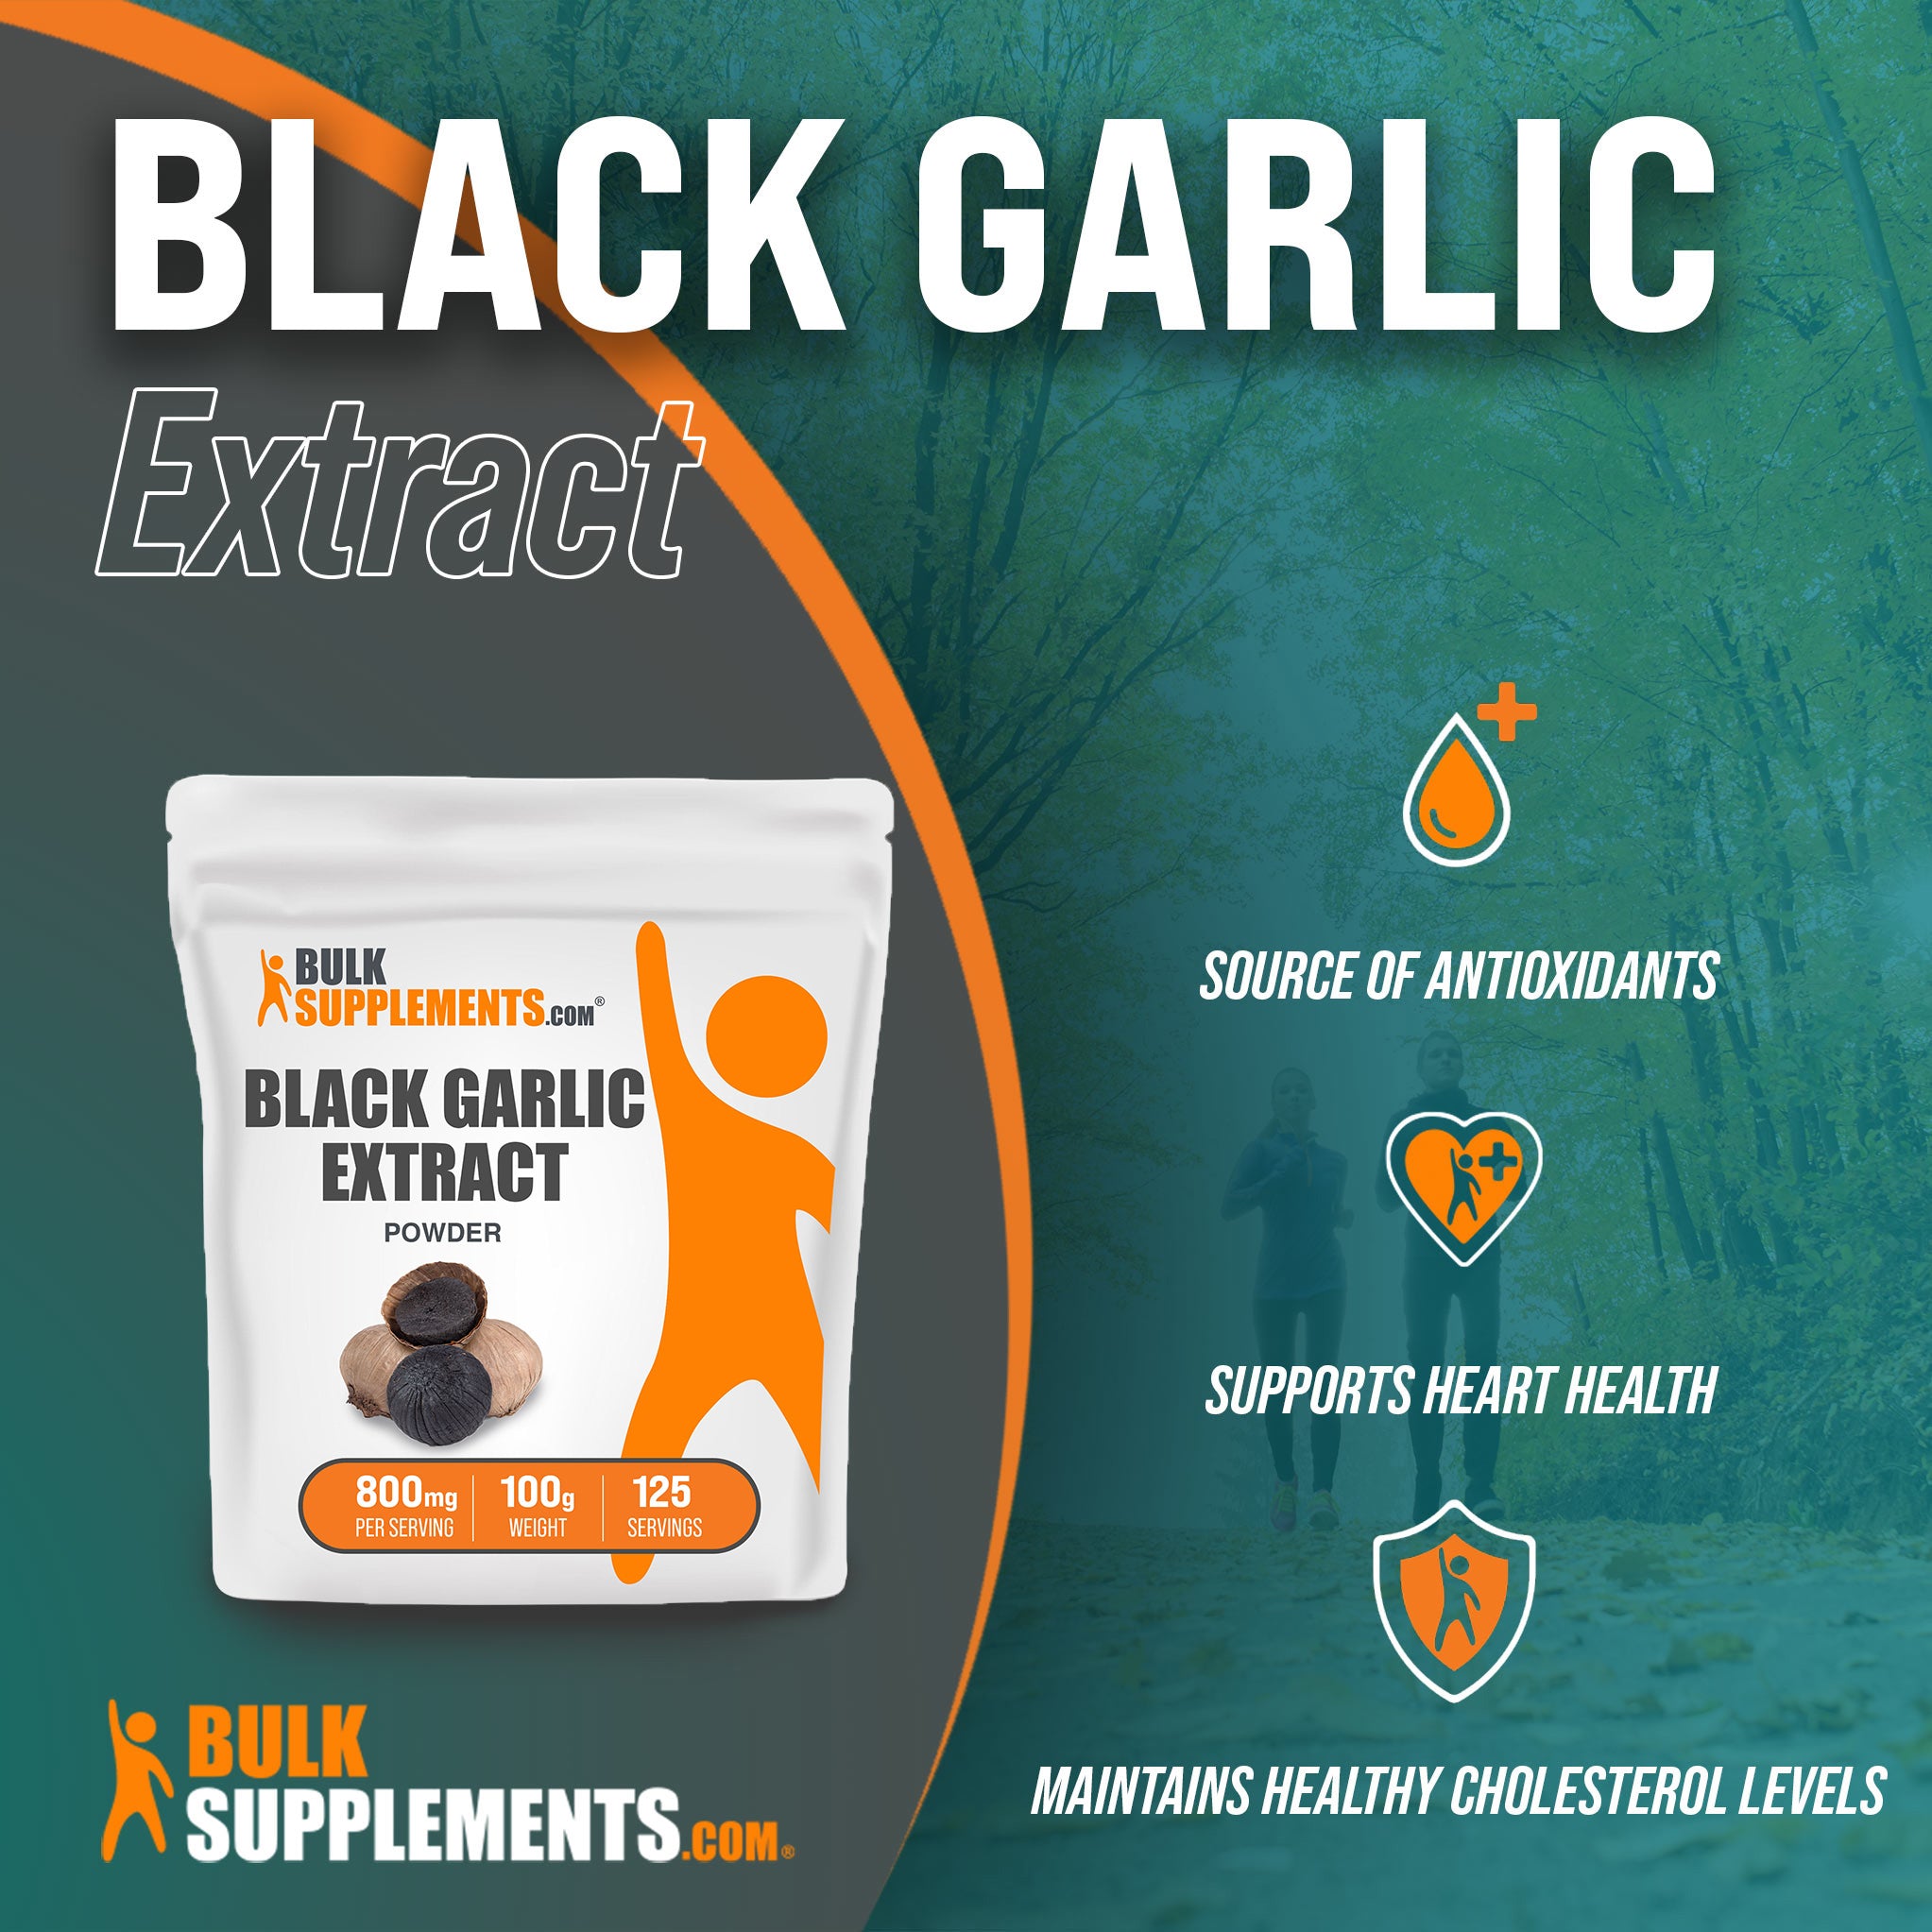 100g bags of Black Garlic Extract are ideal antioxidants supplements